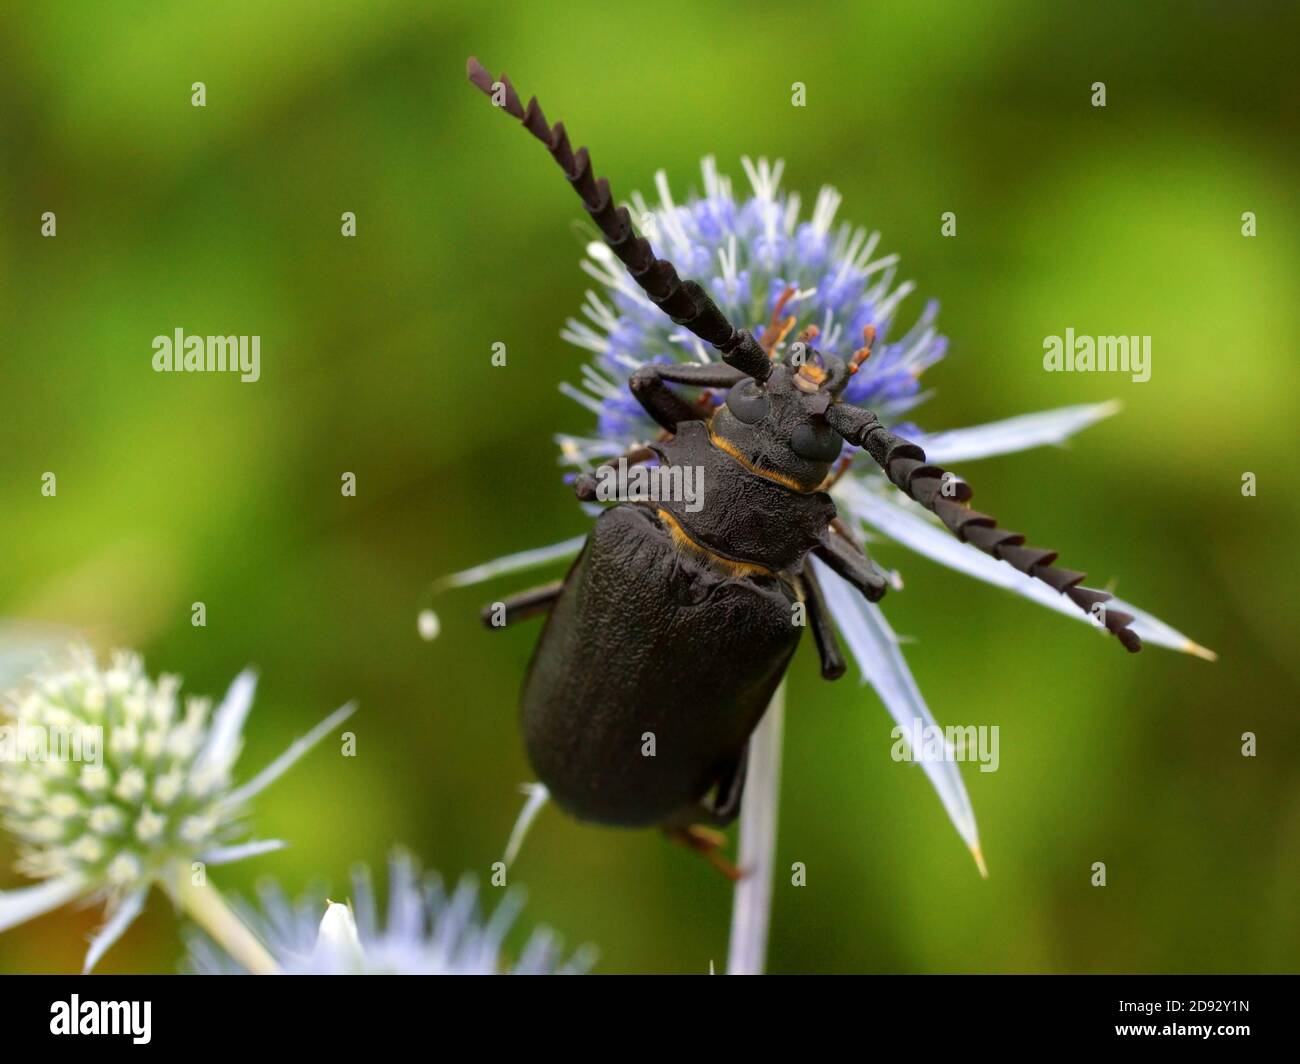 Prionus coriarius, the tanner, the sawyer is a species of longhorn beetle. The beetle sits on a flower outdoors. Stock Photo